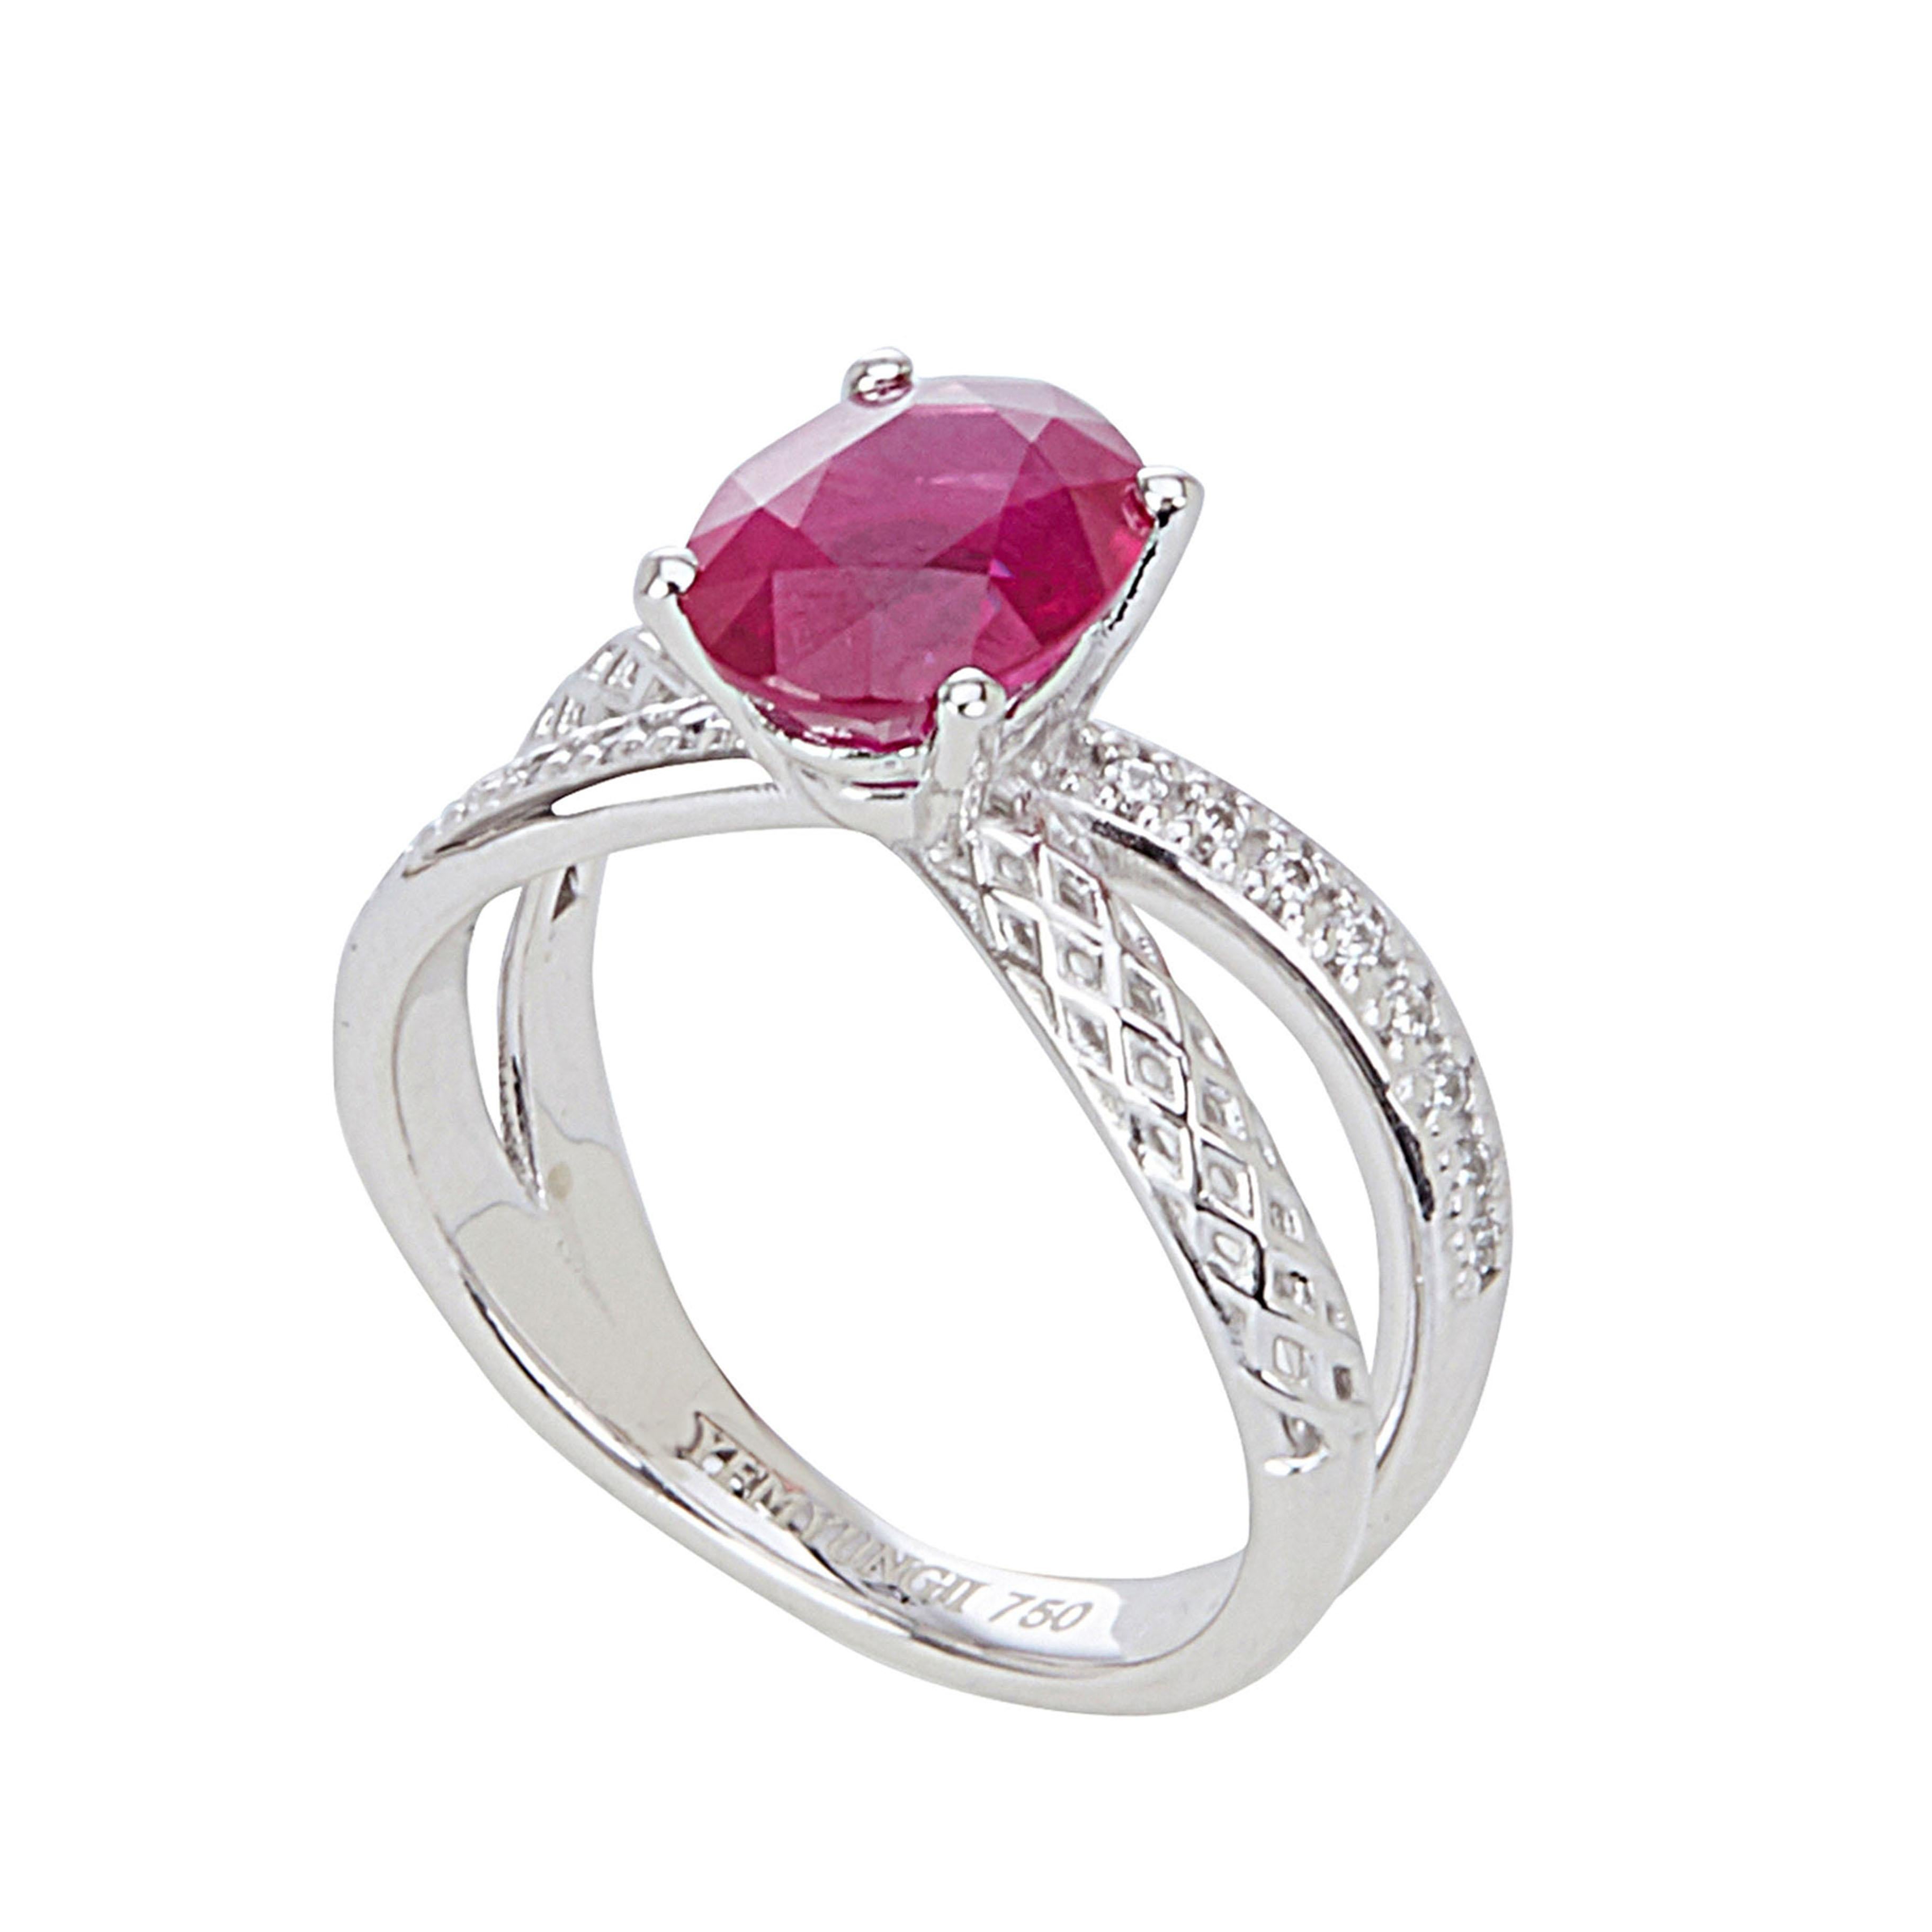 One of Ruby's meanings is passion. It is also said that Ruby can make evil minds disappear so that the owner can keep both the body and the mind healthy.
Burma Ruby Oval Cut 2.37ct weighing. The diamonds set around the main color stone allow the